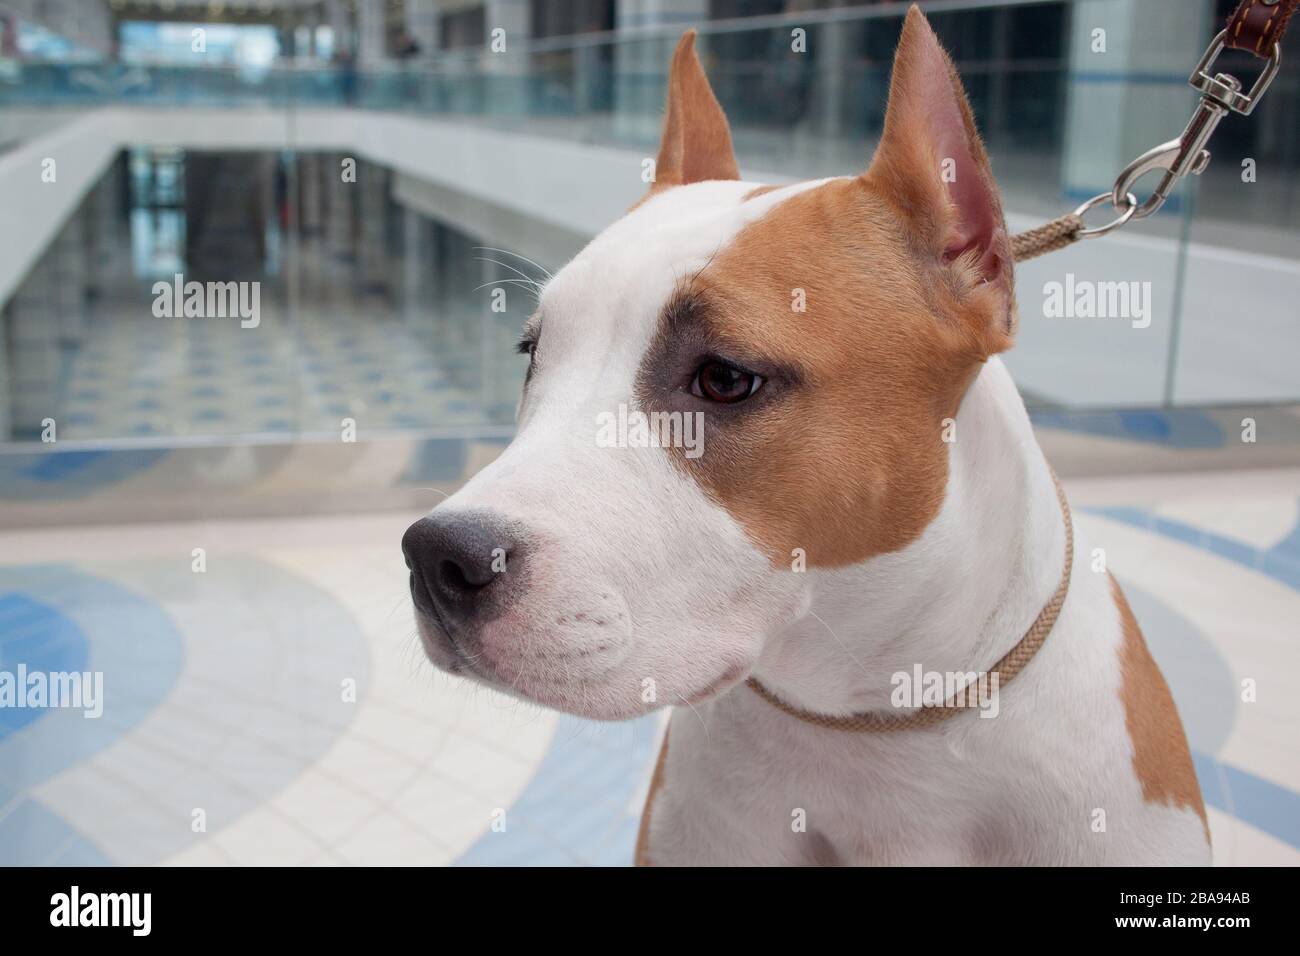 Cute american staffordshire terrier puppy close up. Pet animals. Six month old. Stock Photo